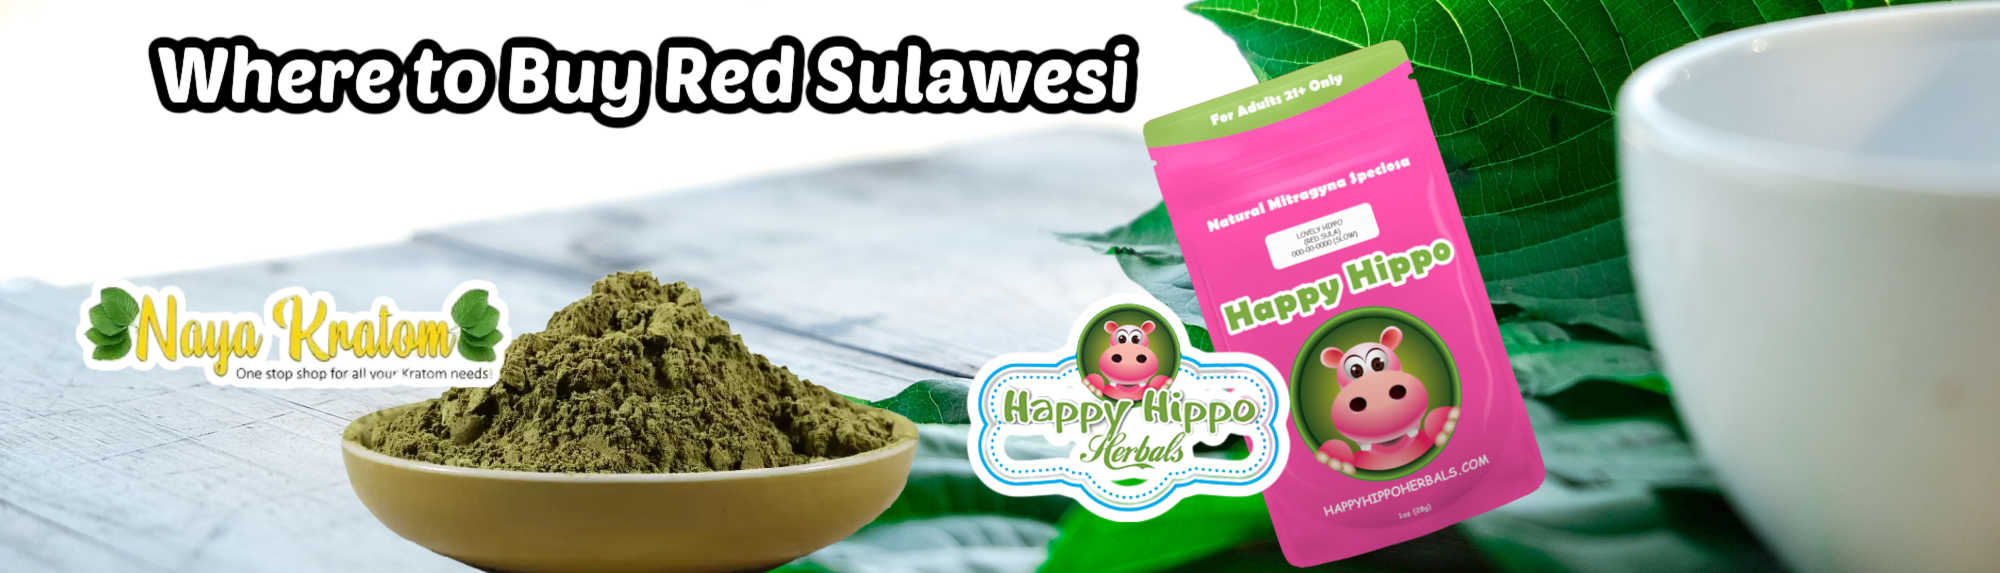 image of where to buy red sulawesi kratom